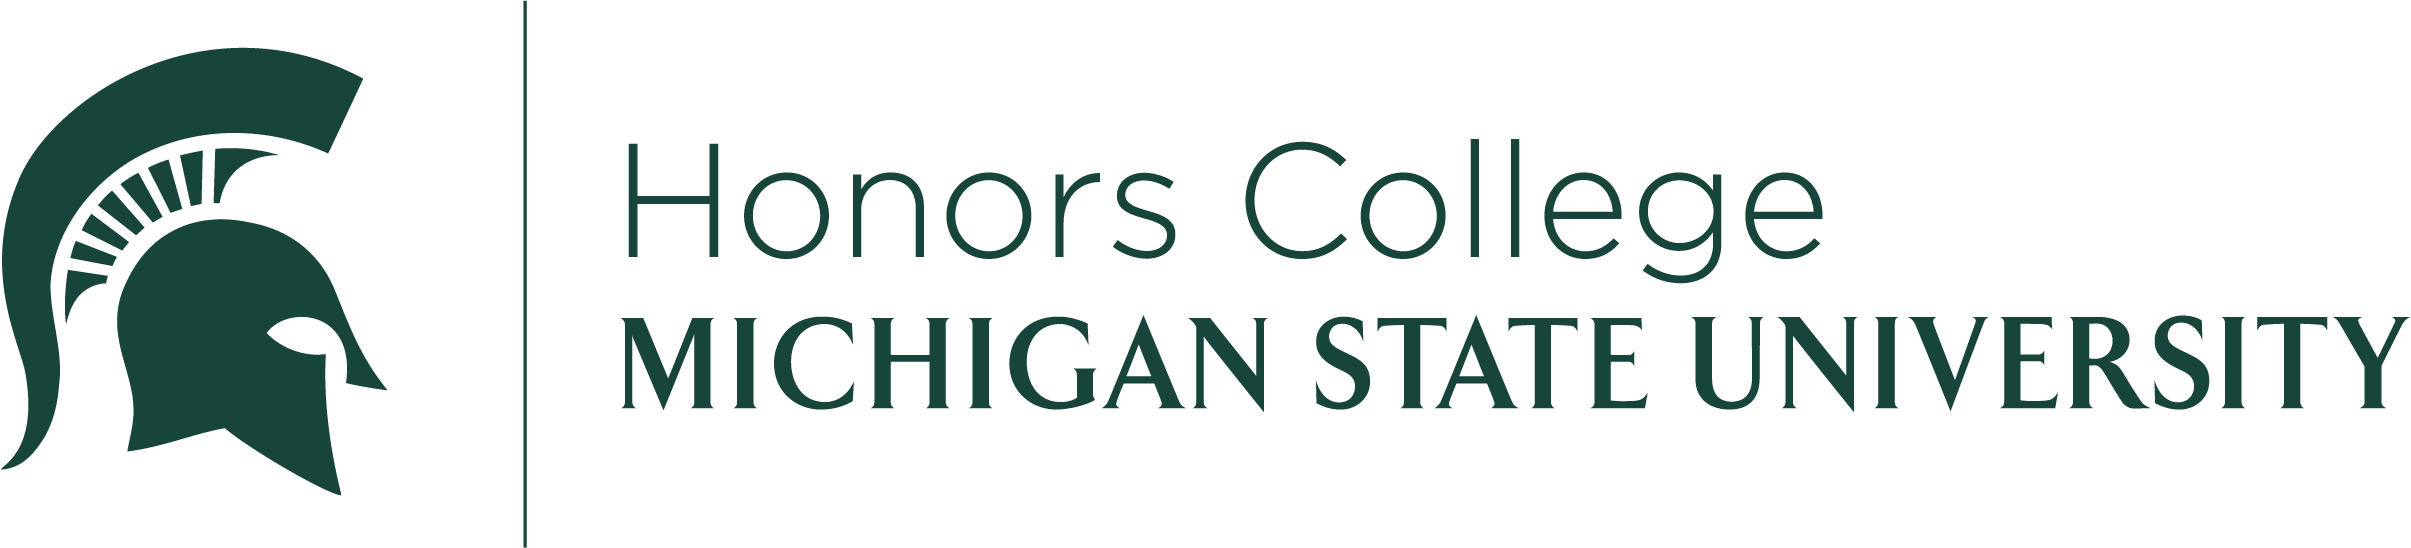 Logo of a dark green Spartan Helmet to the left of the text "Honors College". Underneath are the words "Michigan State University".